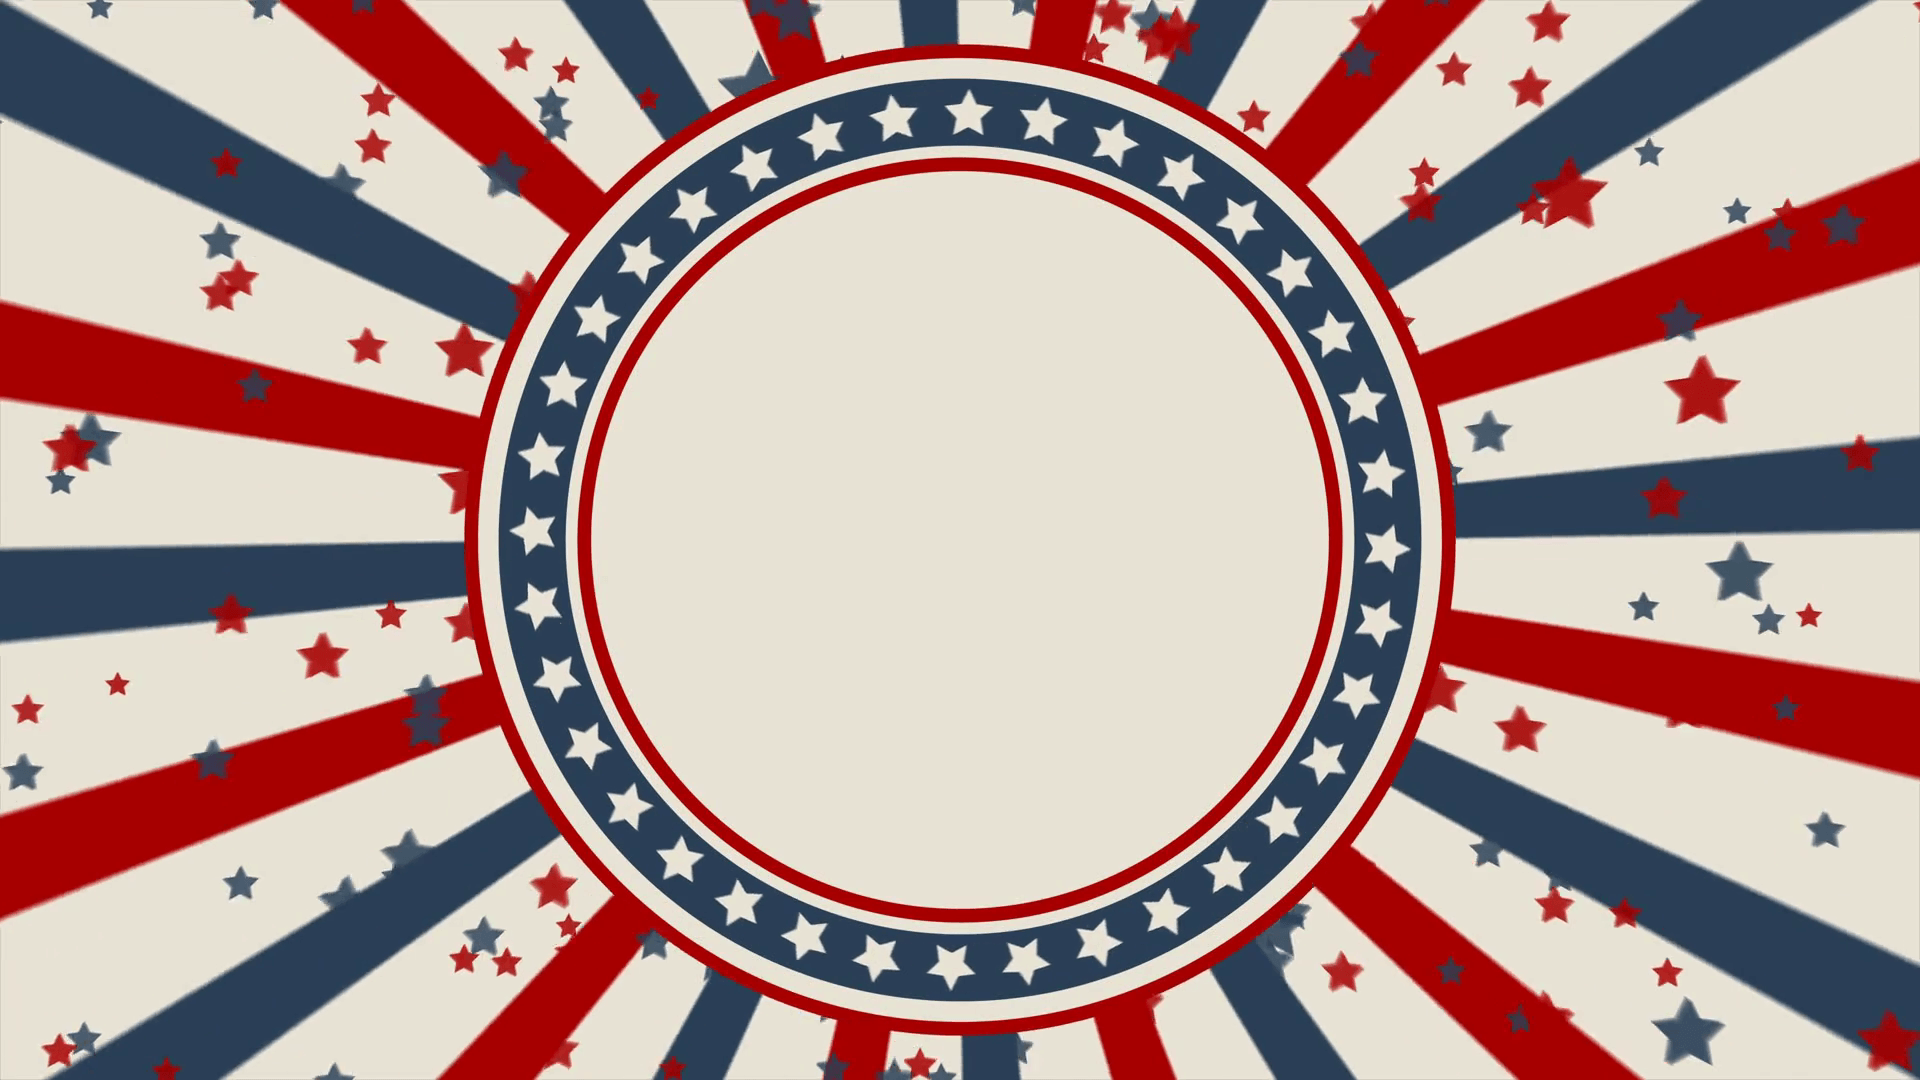 Vintage style American patriotic background. Looped animation Motion